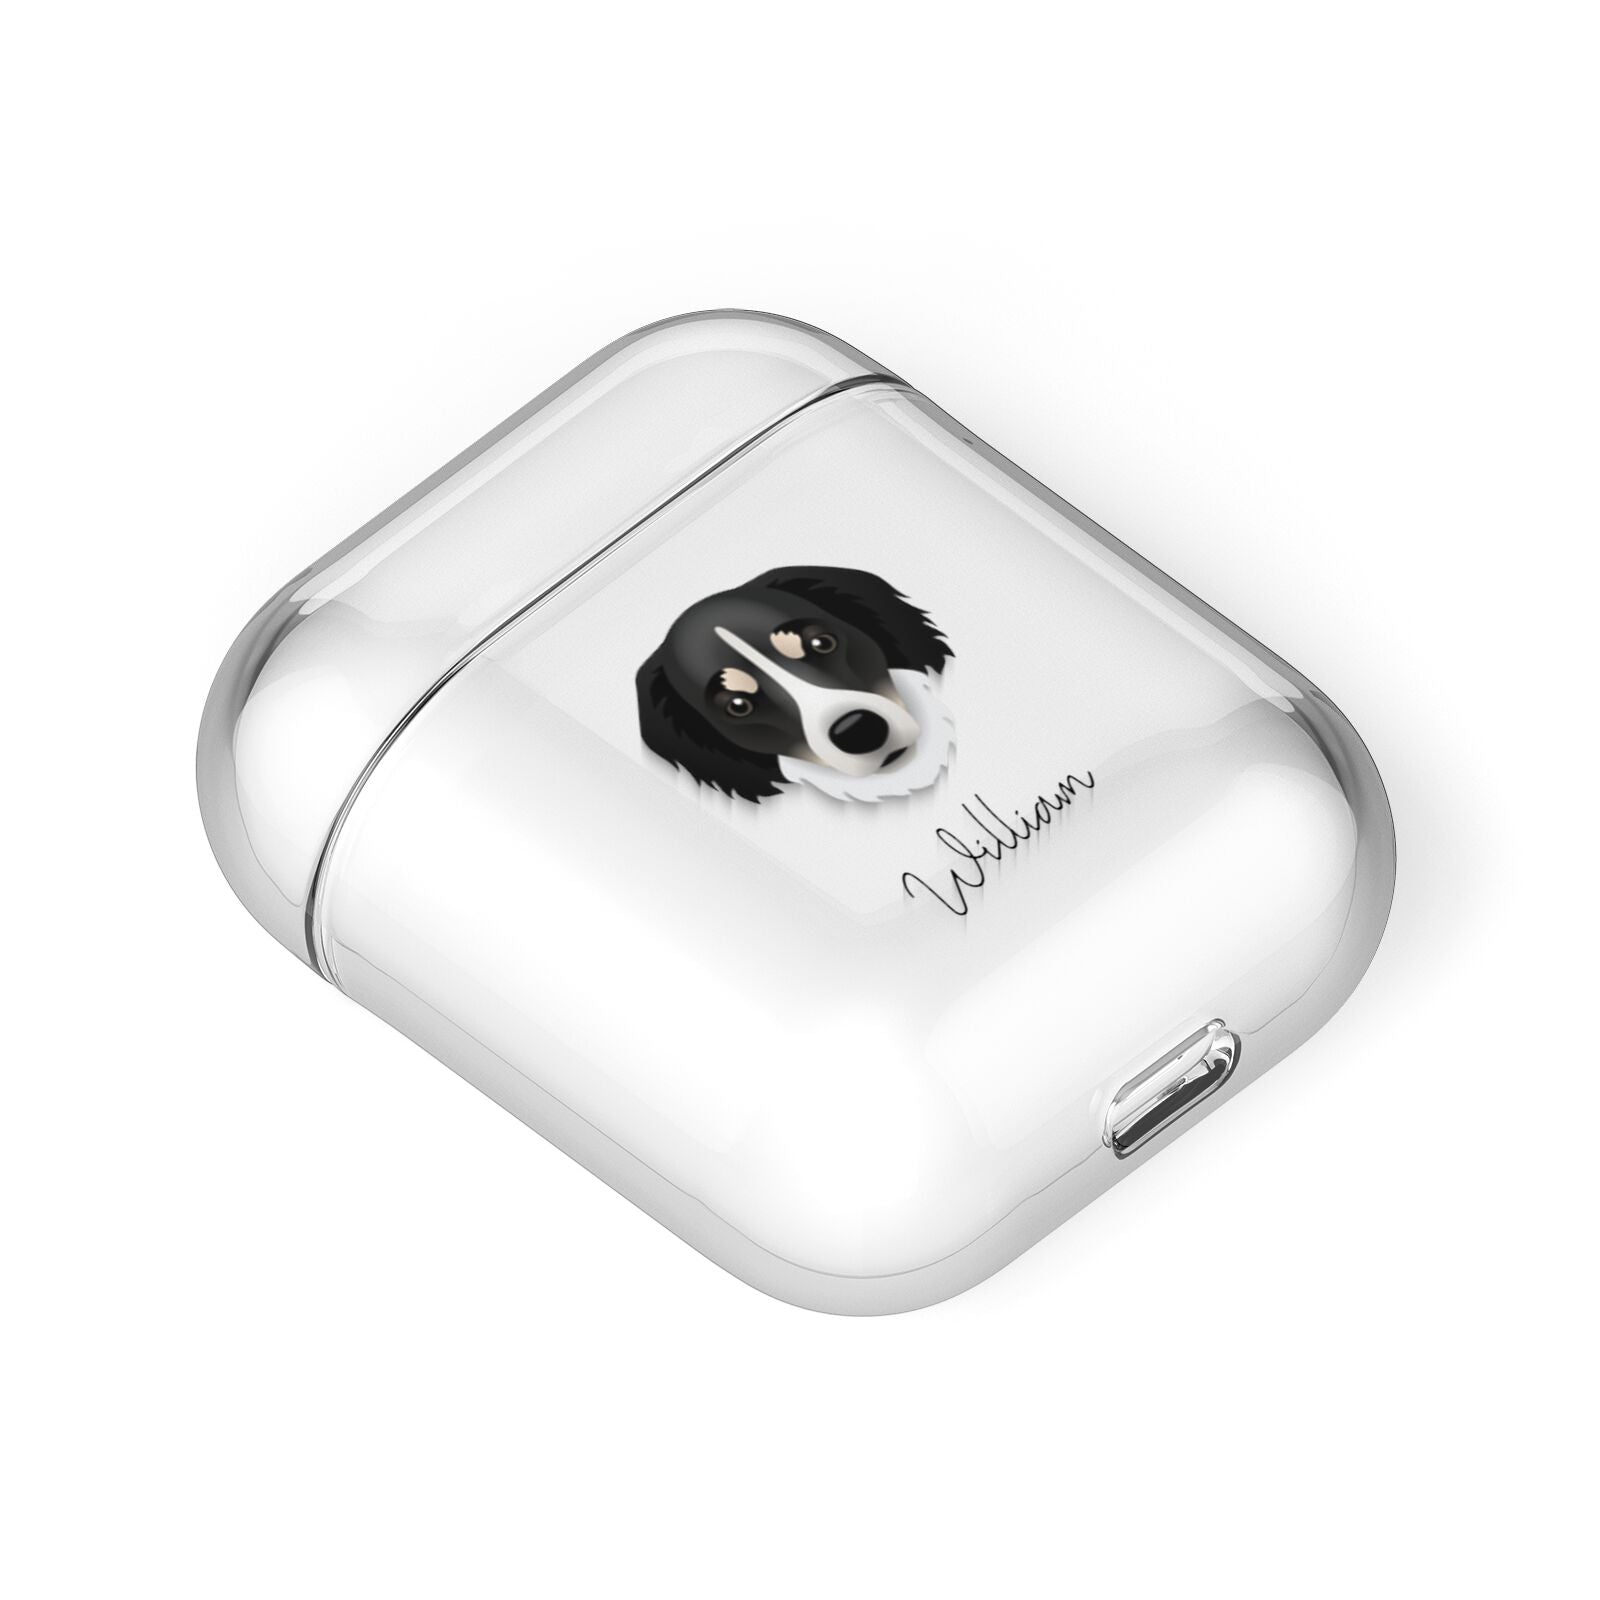 Siberian Cocker Personalised AirPods Case Laid Flat